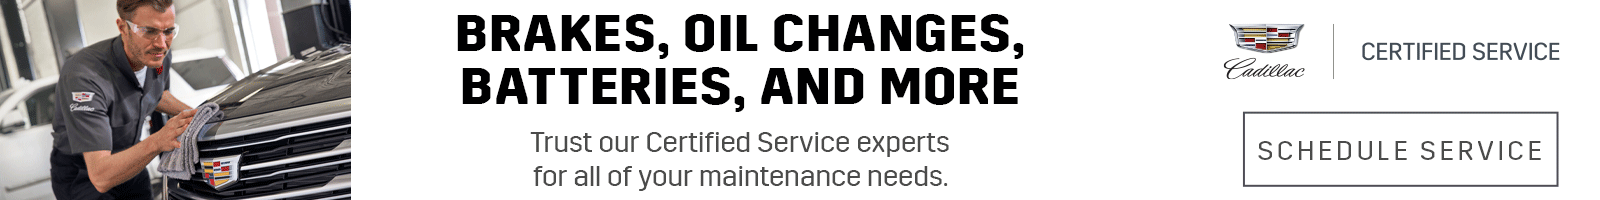 Breakes, Oil Changes, Bateries, and more schedule service